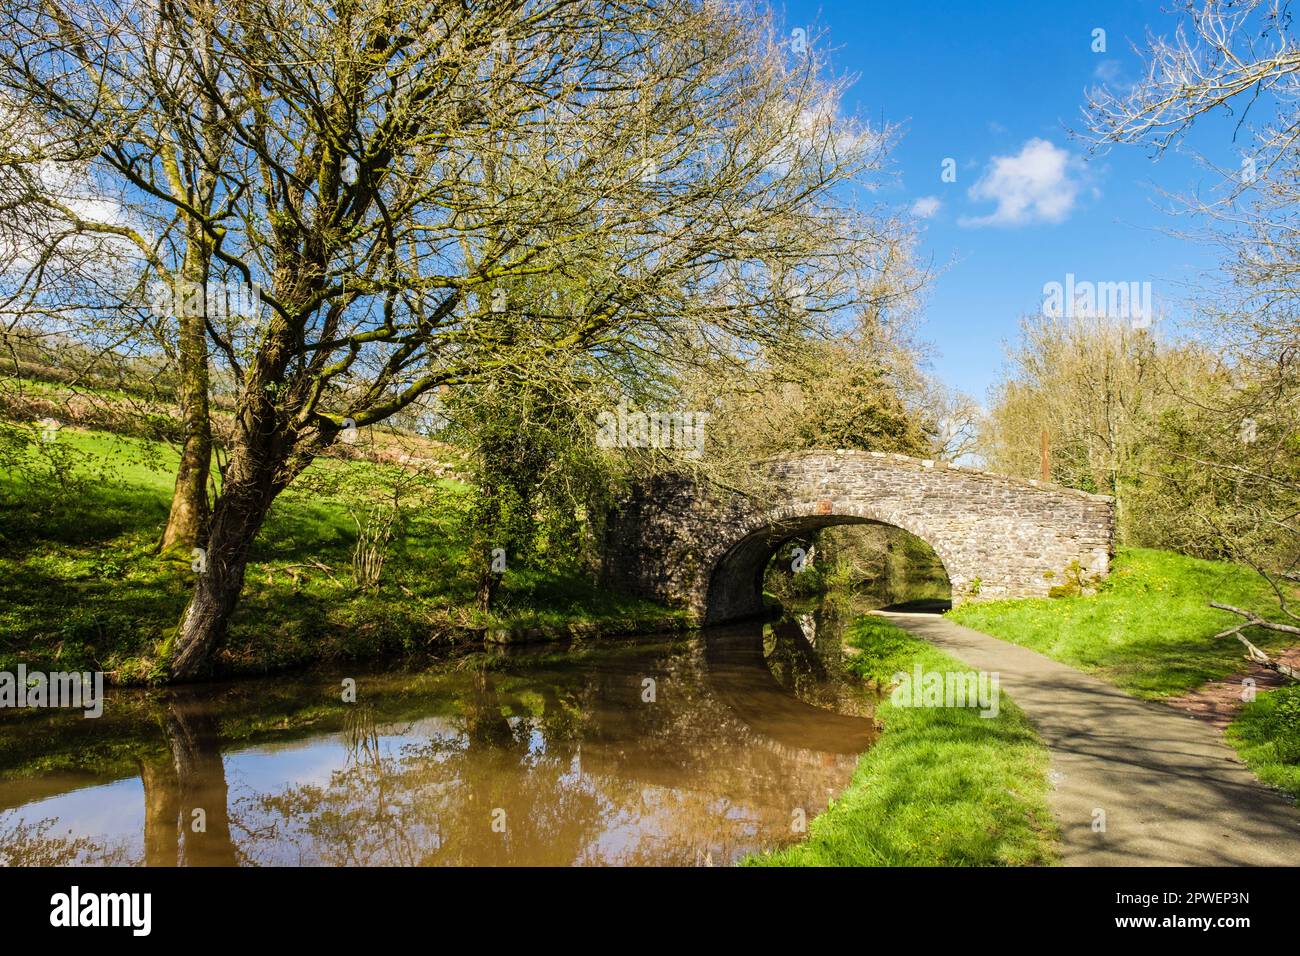 Old stone bridge 151 on Monmouthshire and Brecon Canal in Brecon Beacons National Park. Pencelli, Brecon (Aberhonddu), Powys, Wales, UK, Britain Stock Photo